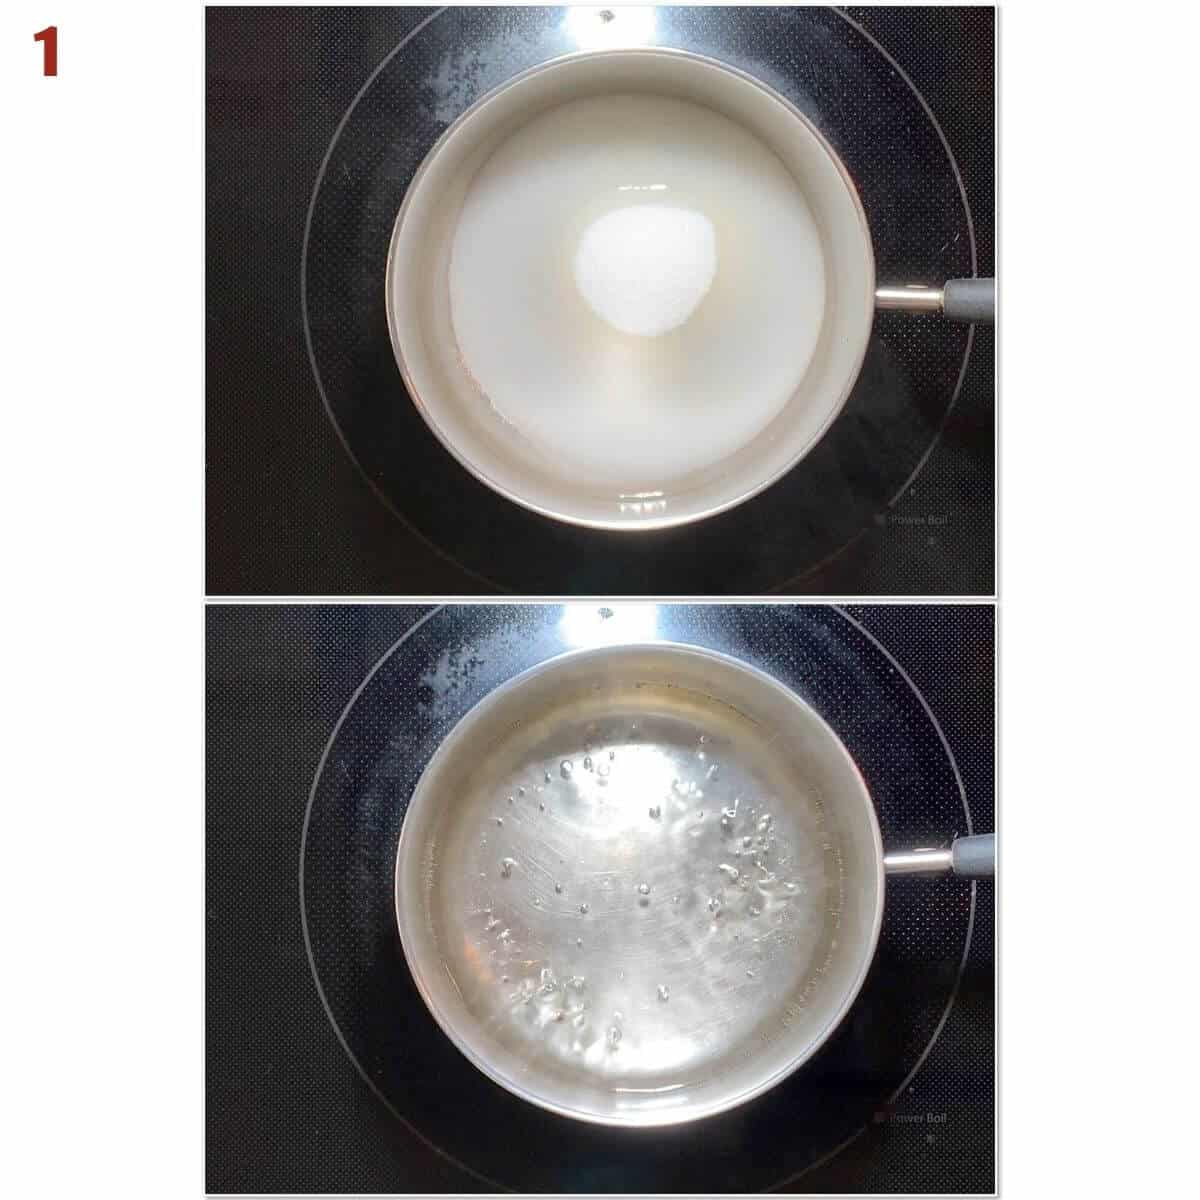 Collage of before & after dissolving sugar into water.